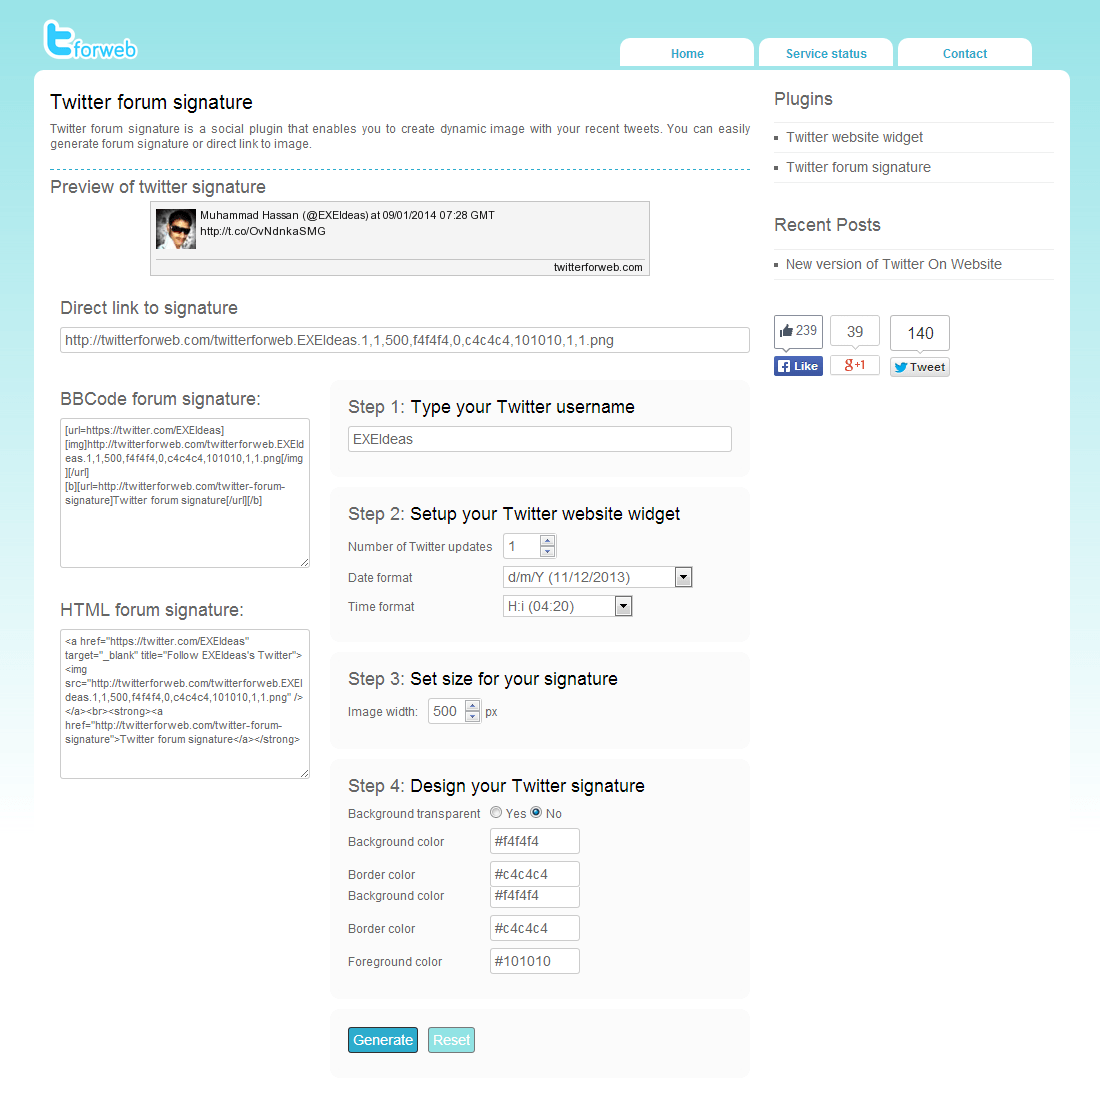 How To Add Your Latest Tweets In Forum Signature Automatically?